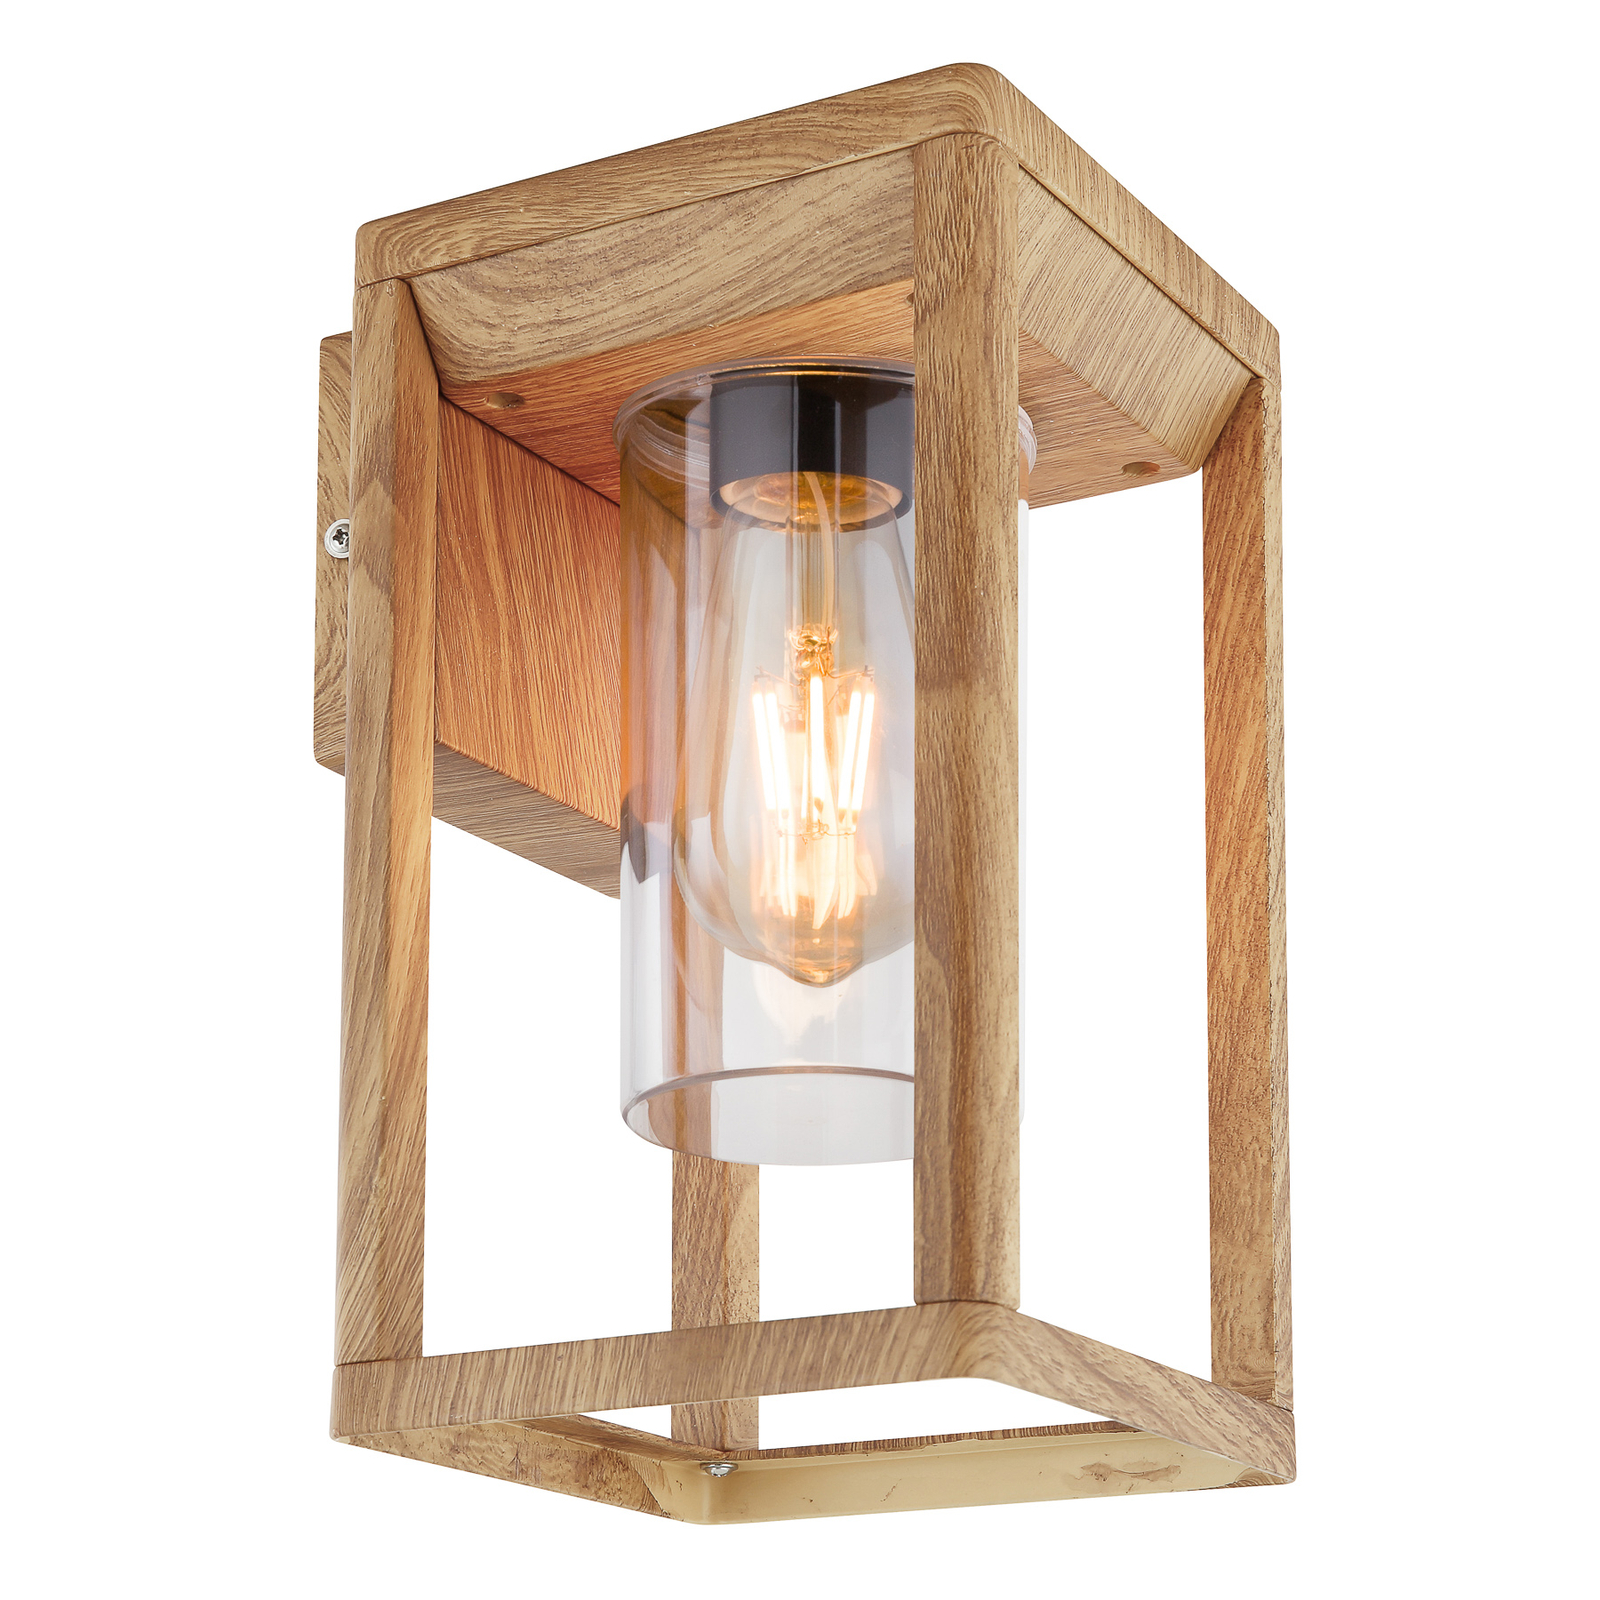 Candela outdoor wall lamp in a wood look